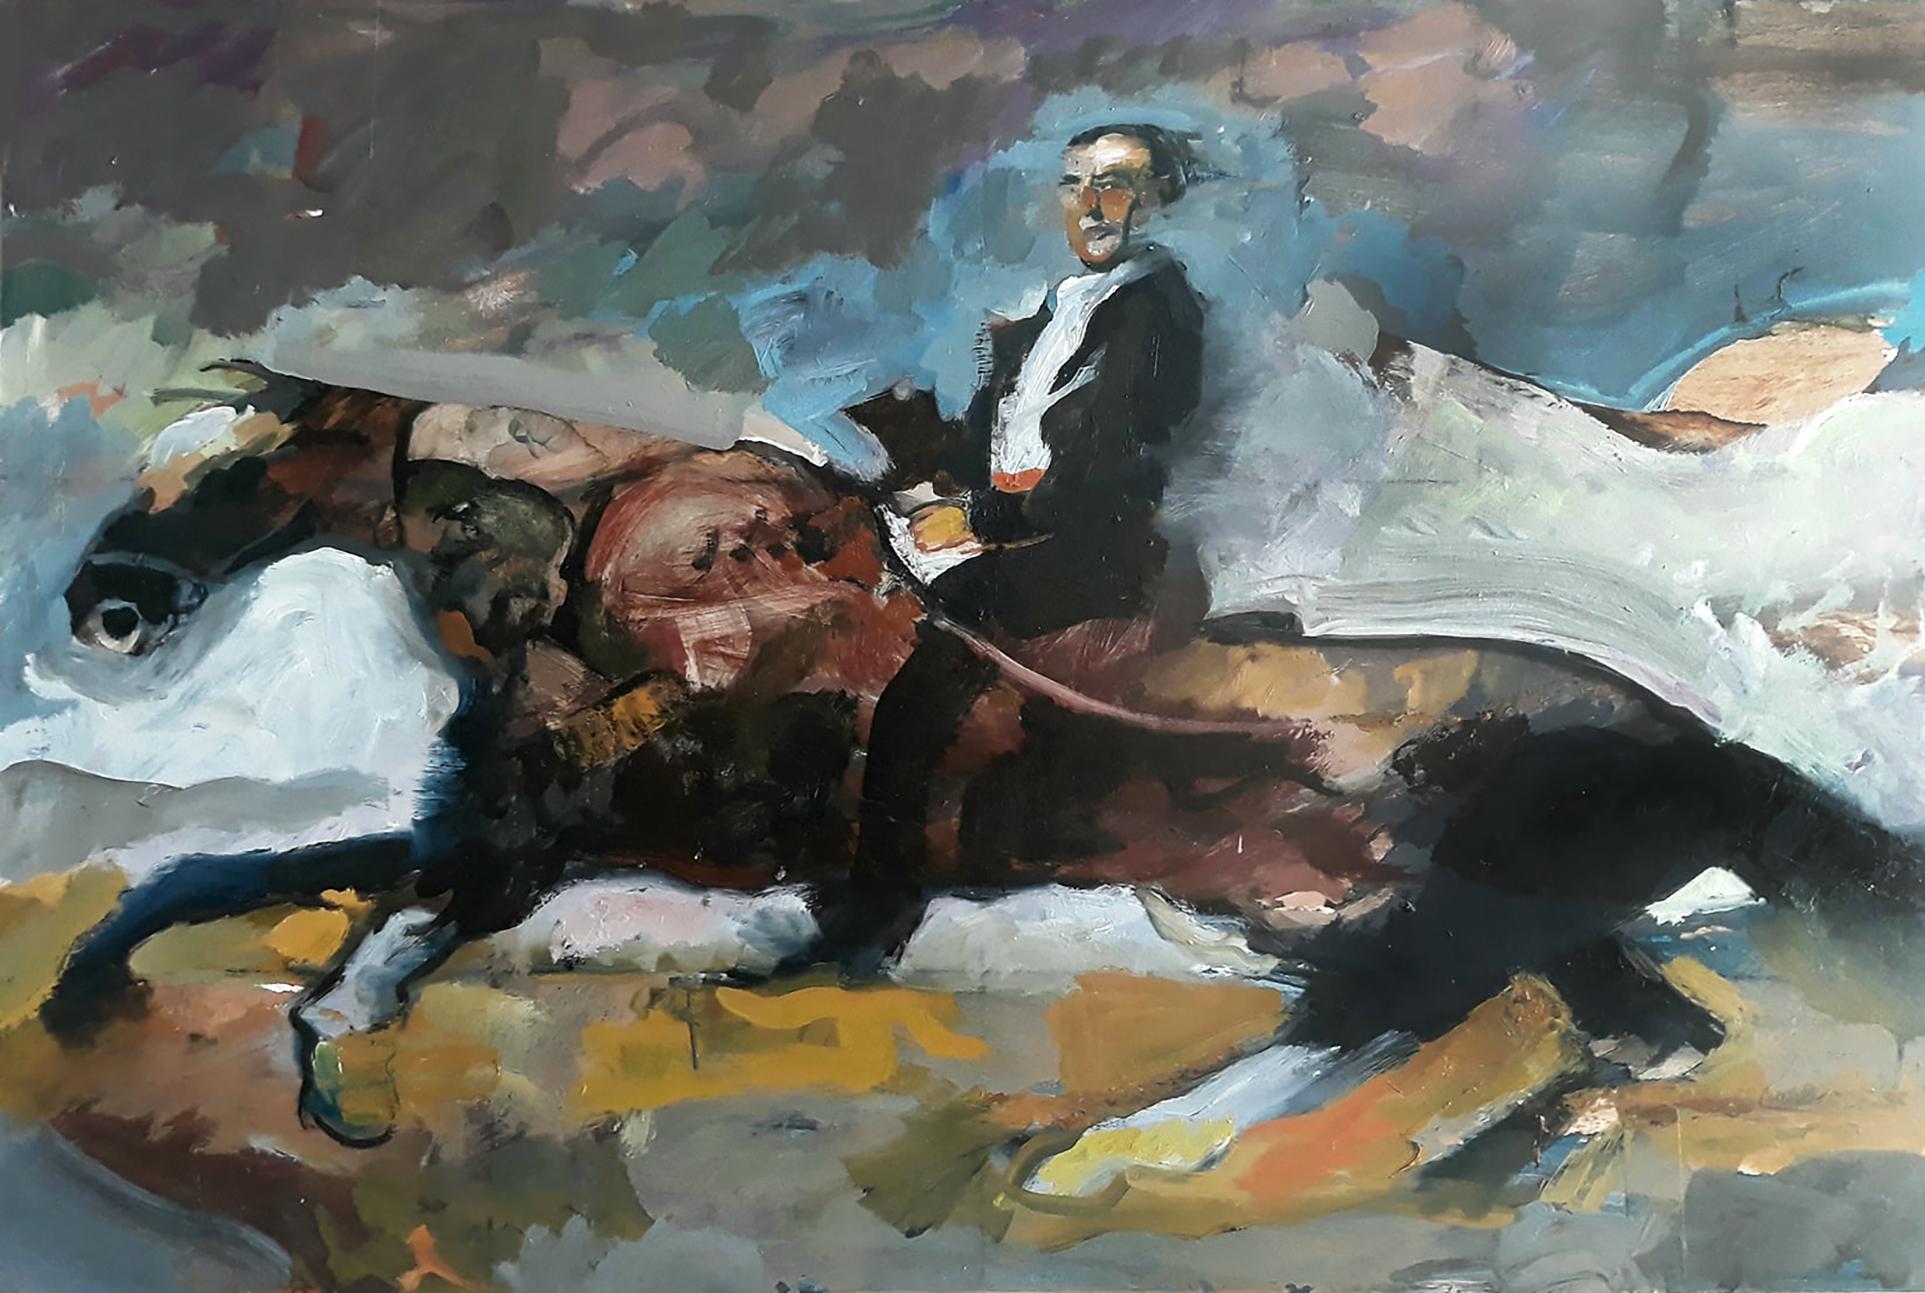 Tom Bennett Animal Painting - No Beef with Wellington (after Goya) abstracted horse, rider, classical style